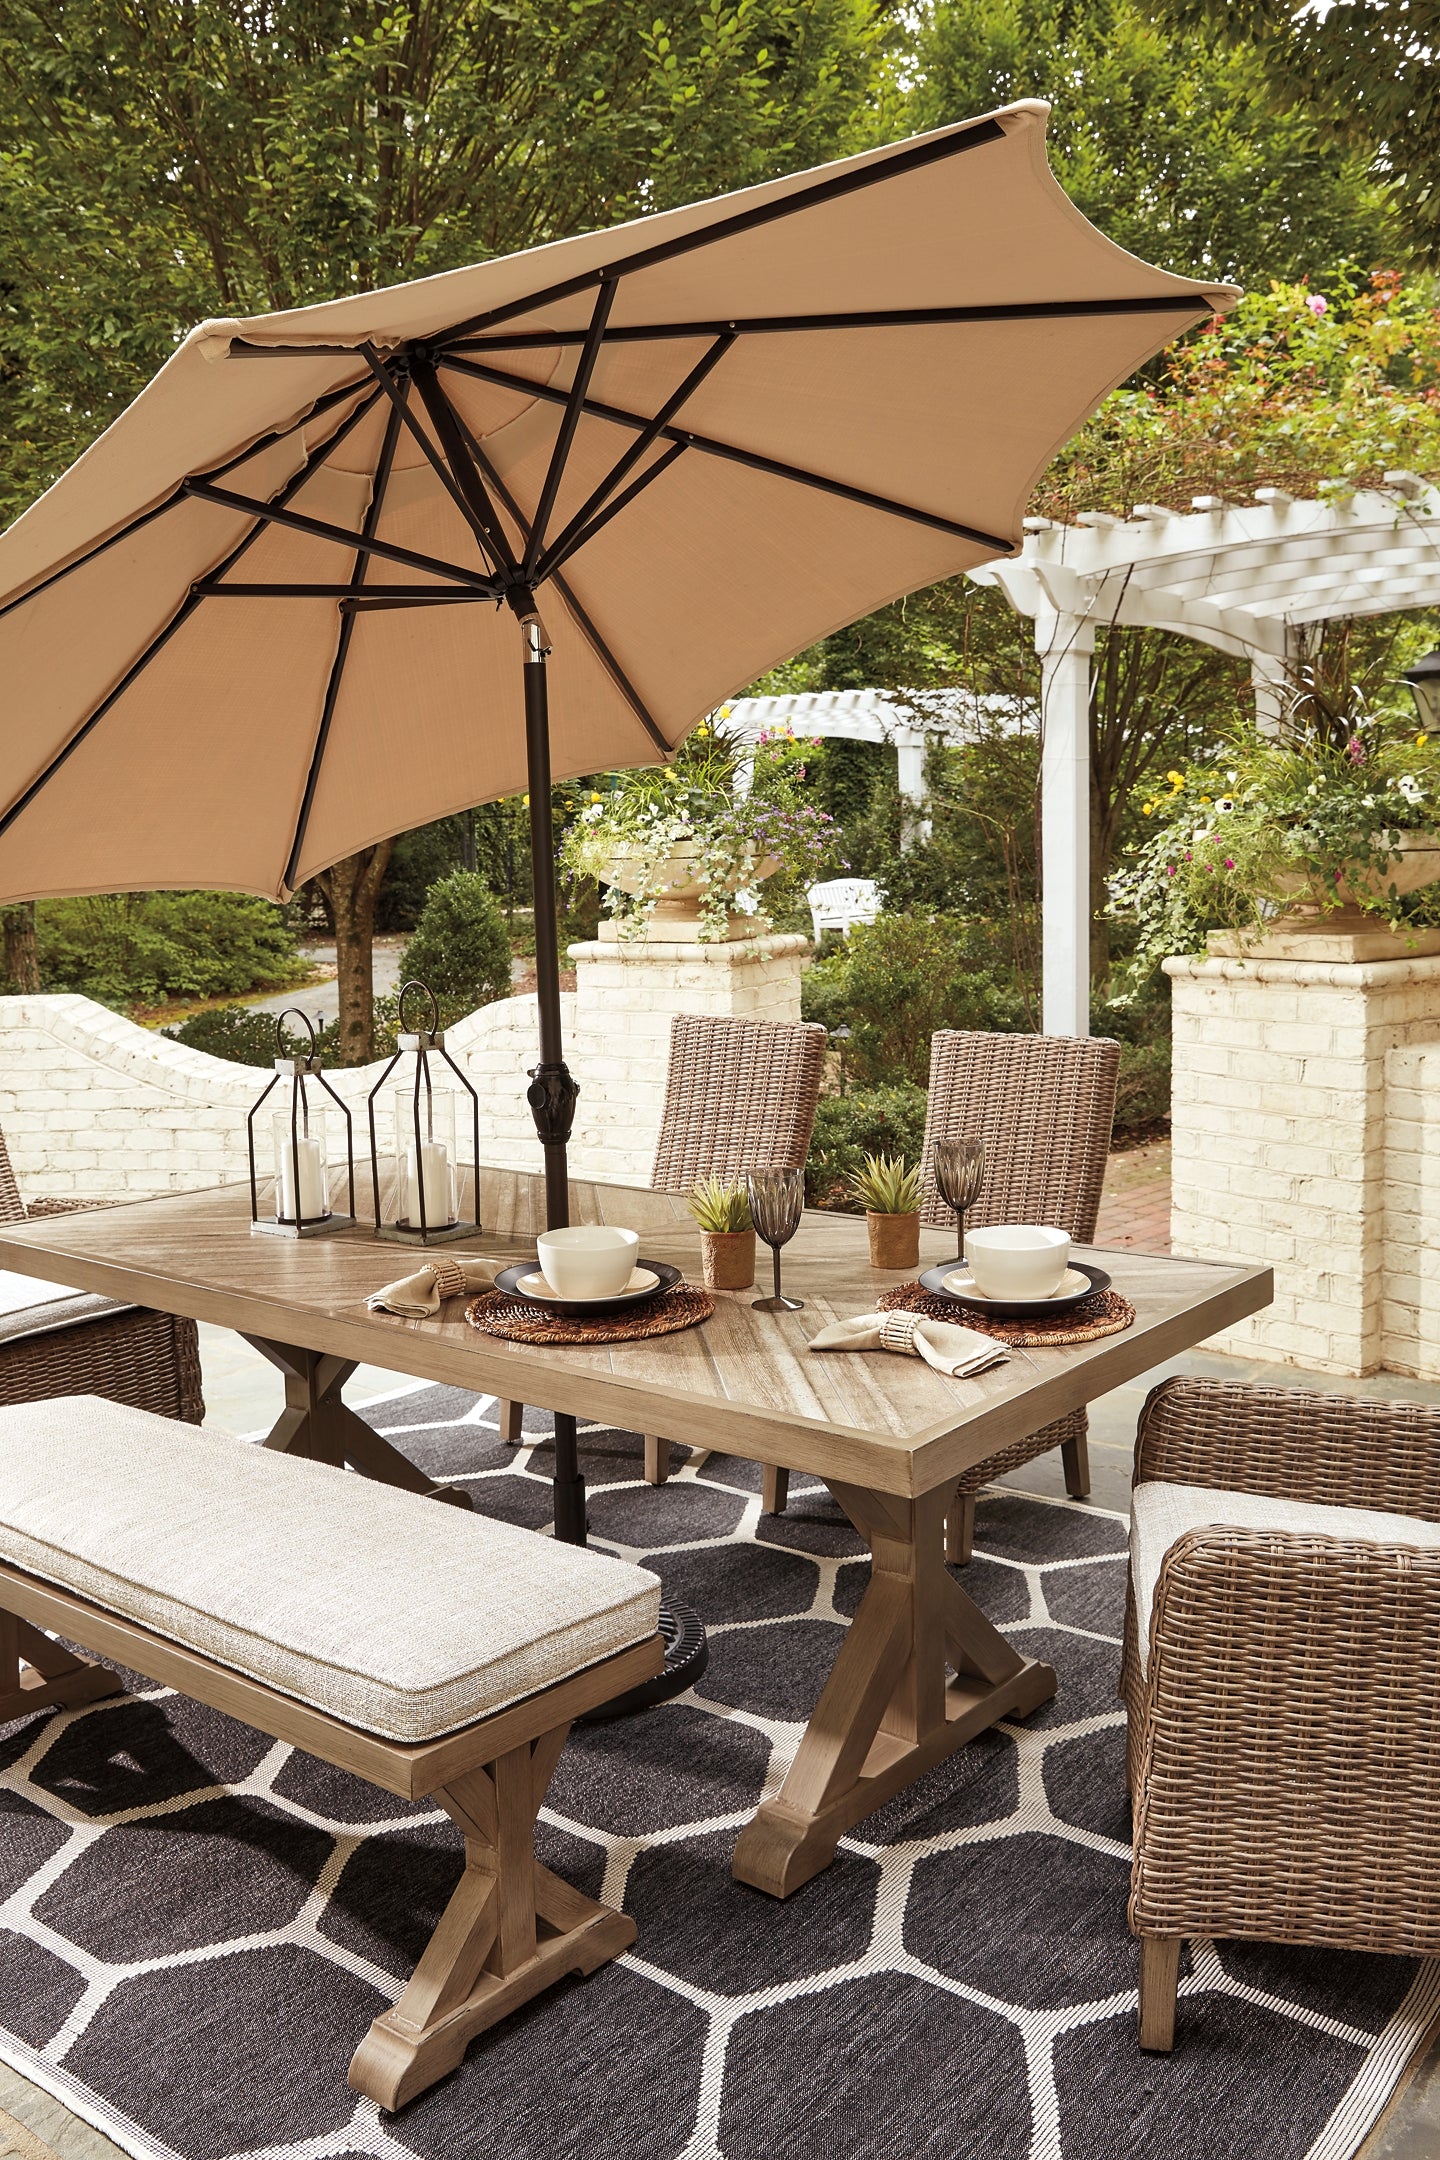 Beachcroft Outdoor Dining Table and 2 Chairs and 2 Benches Wilson Furniture (OH)  in Bridgeport, Ohio. Serving Bridgeport, Yorkville, Bellaire, & Avondale